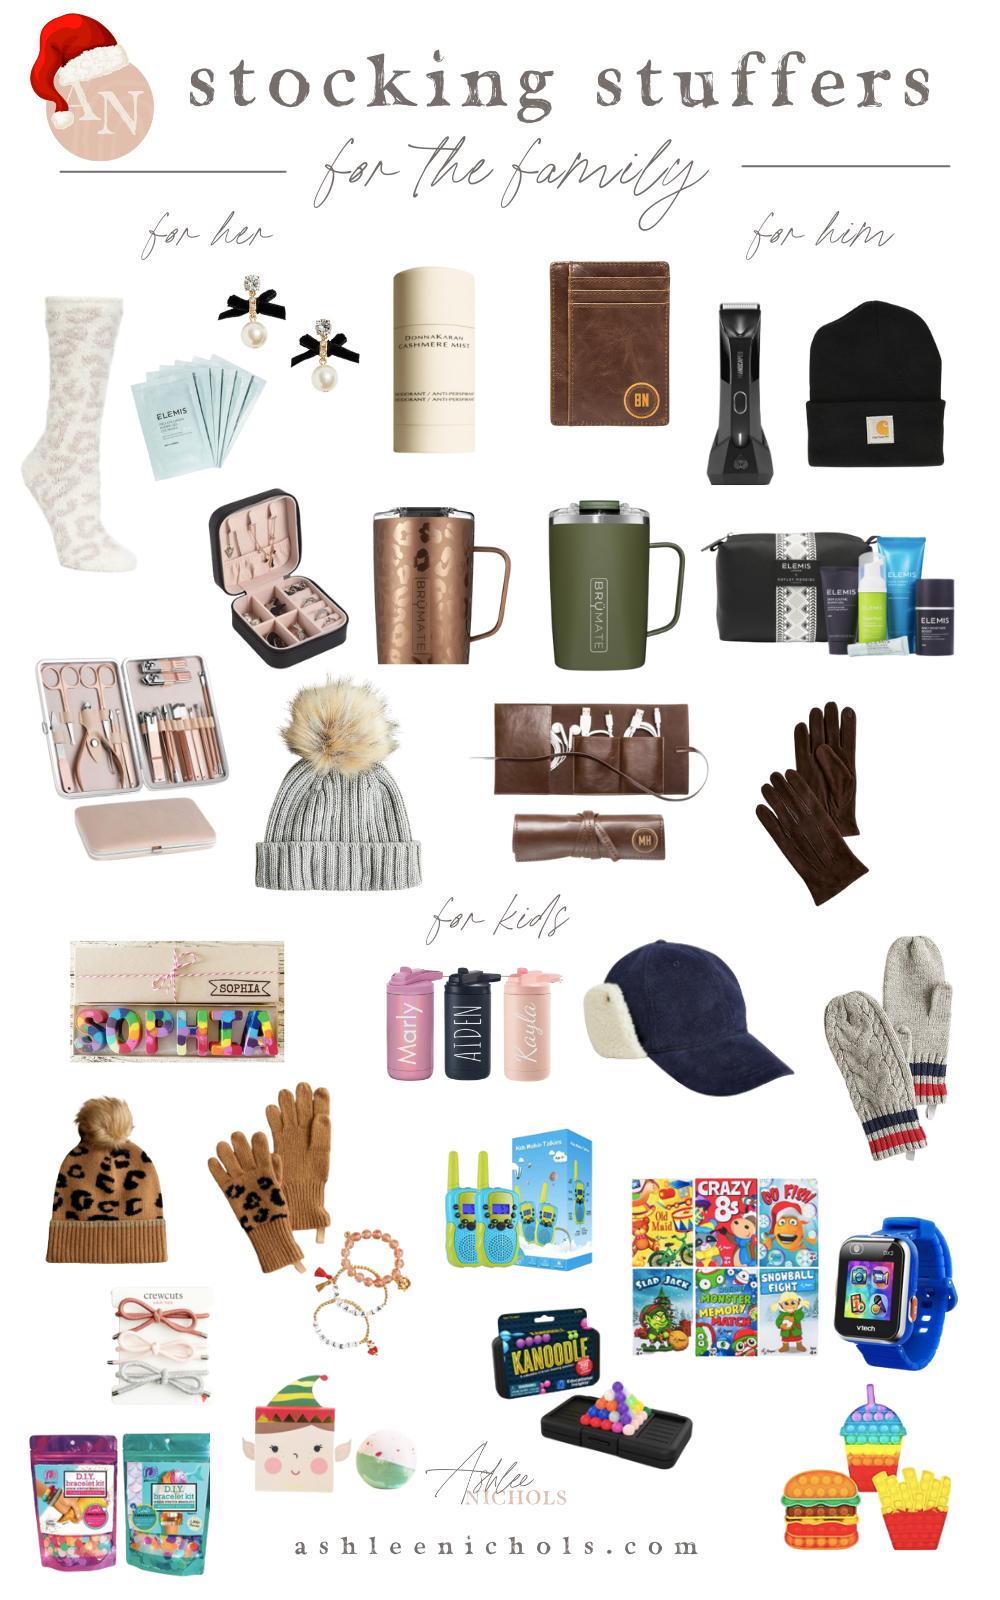 Holiday Gift Guide: The Stocking Stuffer